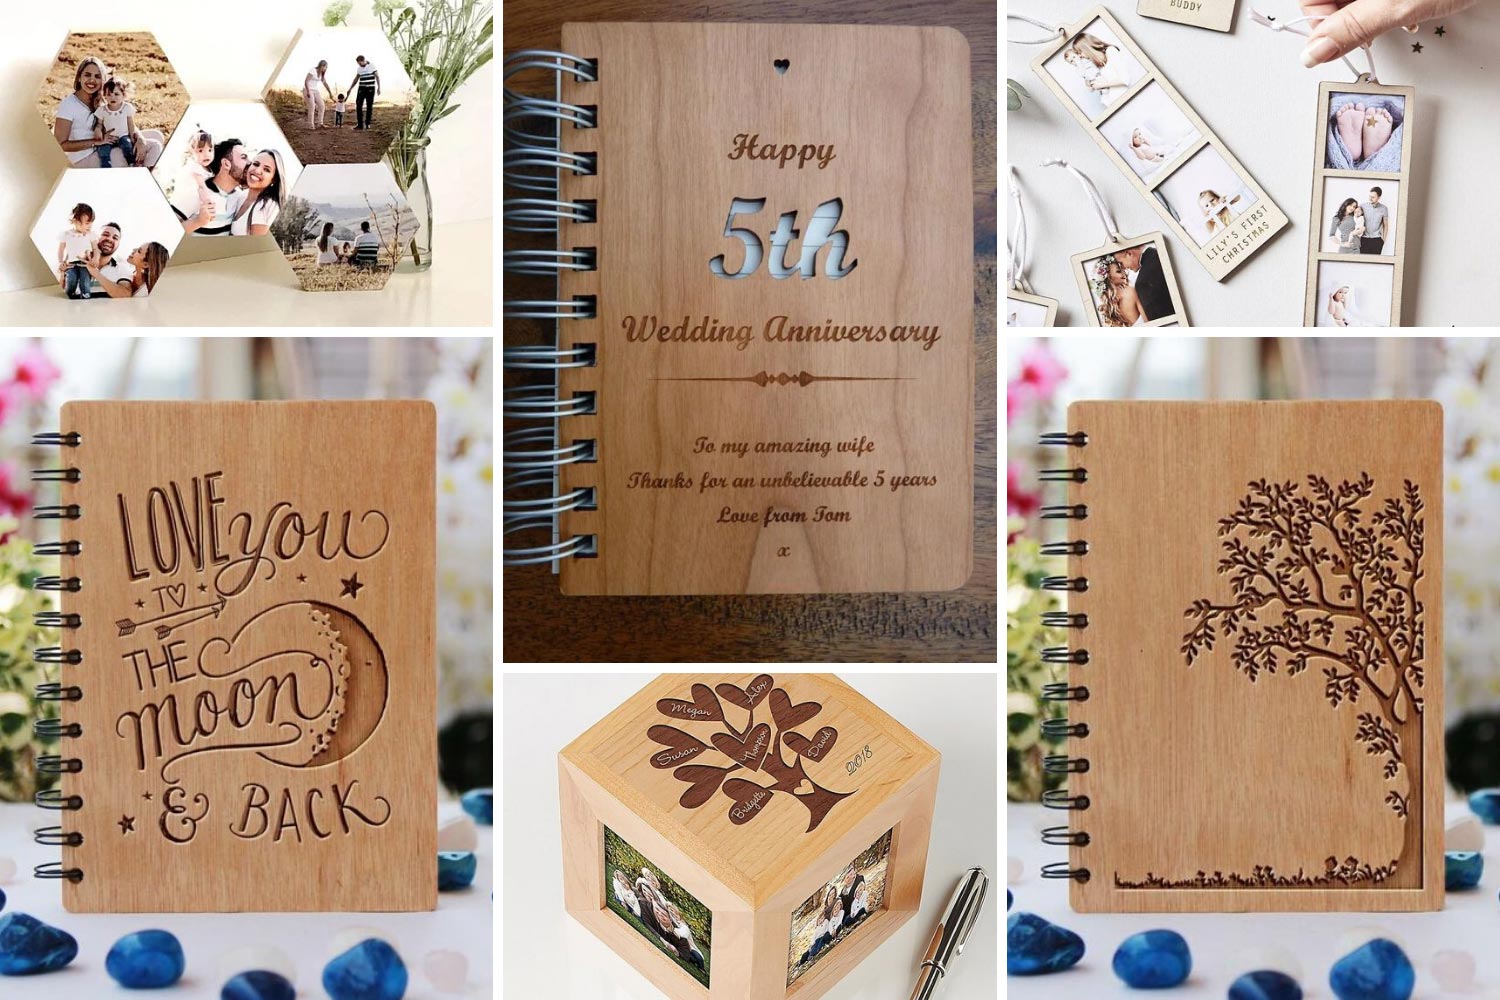 The best gift for a wooden wedding - pictures on boards